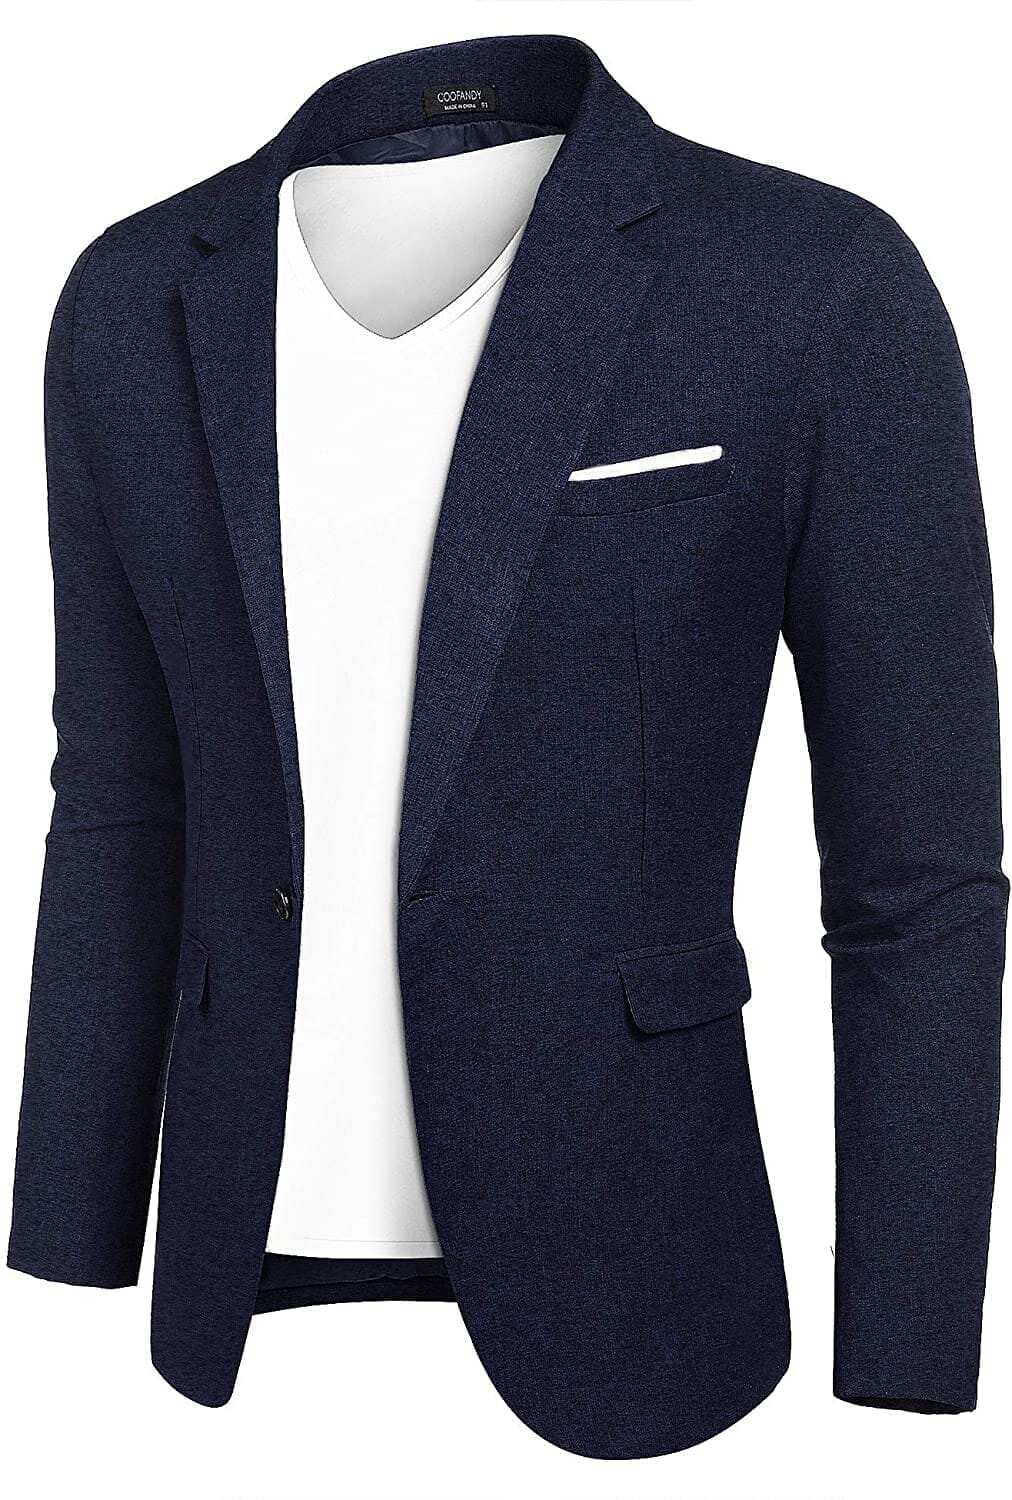 Coofandy Casual Suit Jackets (US Only) Blazer coofandy Navy Blue S 